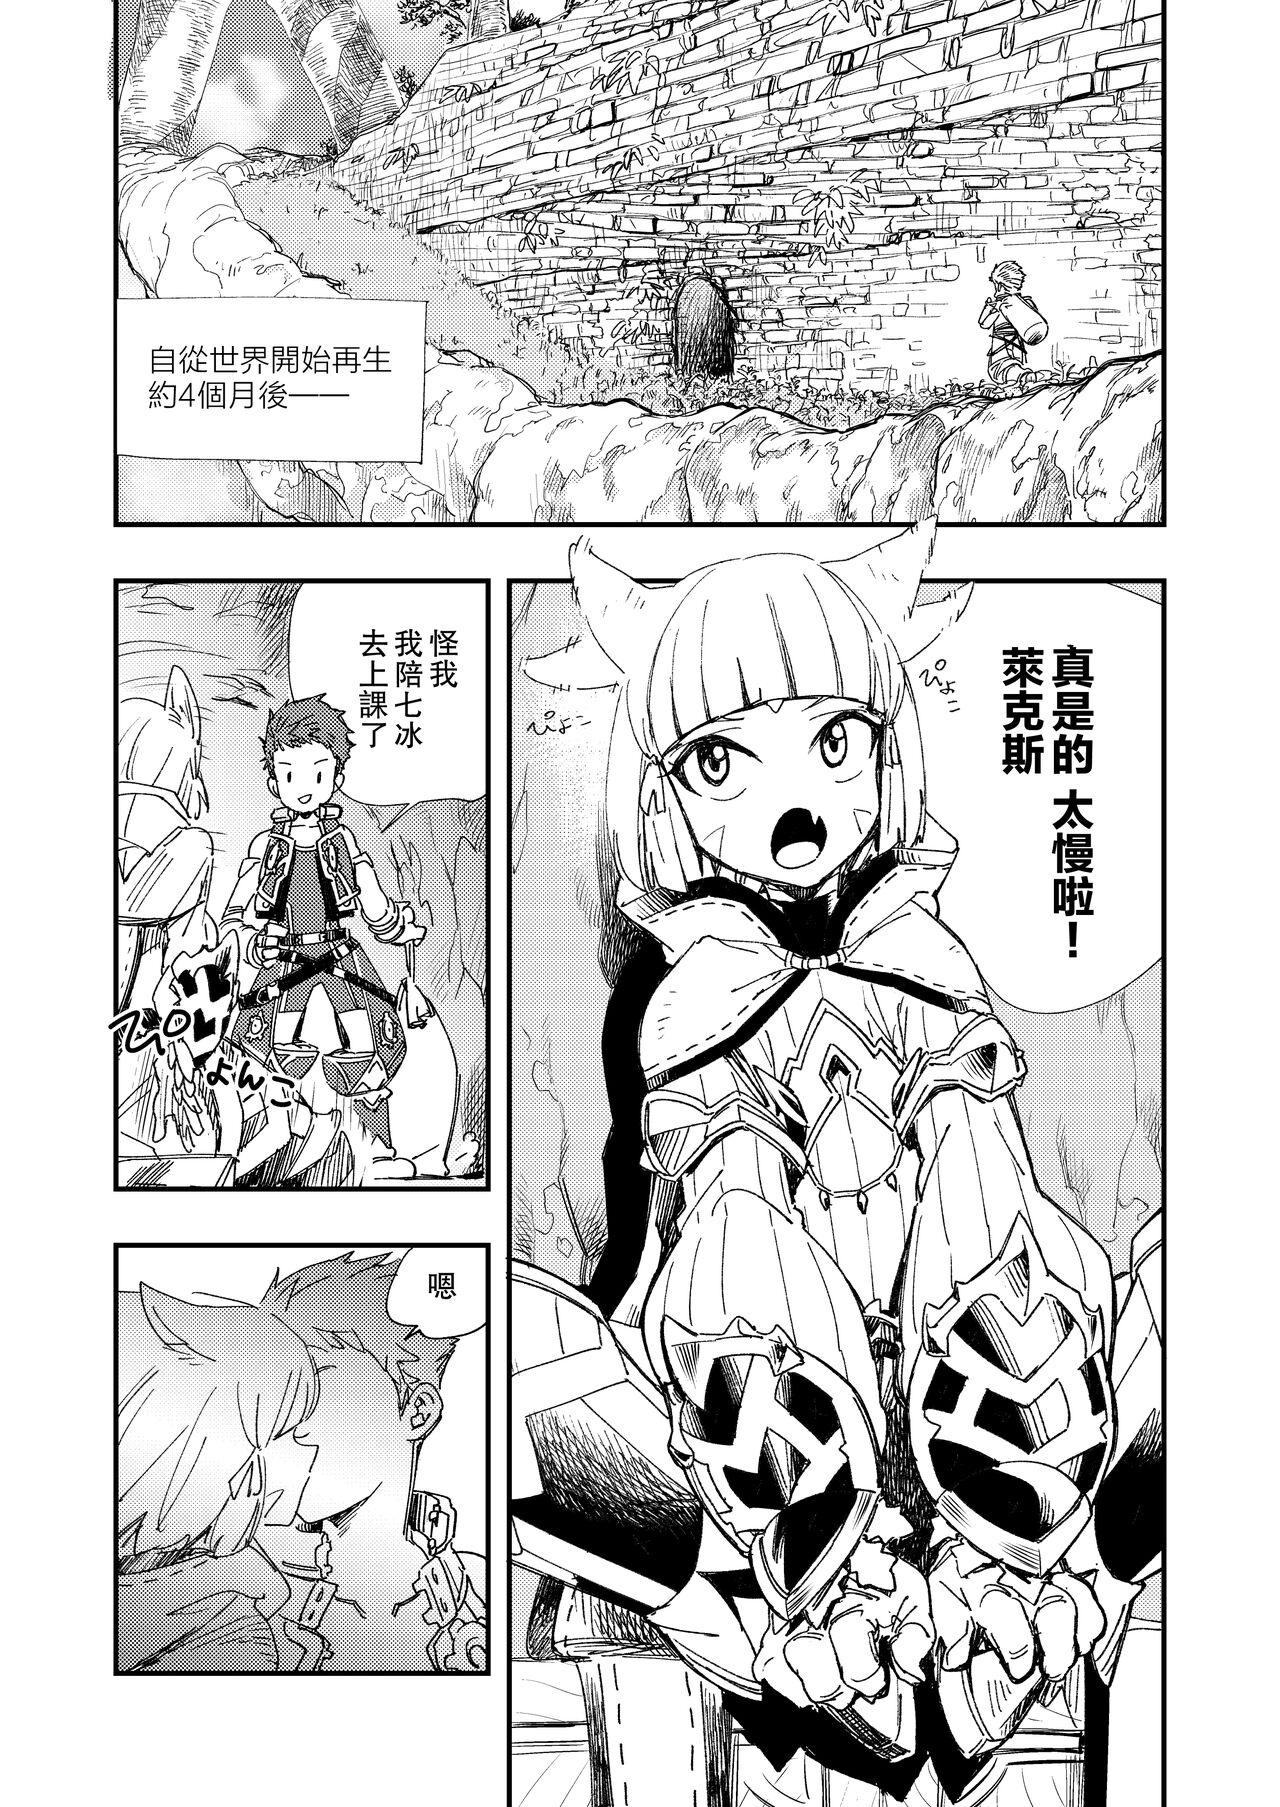 Mexicana NEAREST - Xenoblade chronicles 2 Ass - Page 4